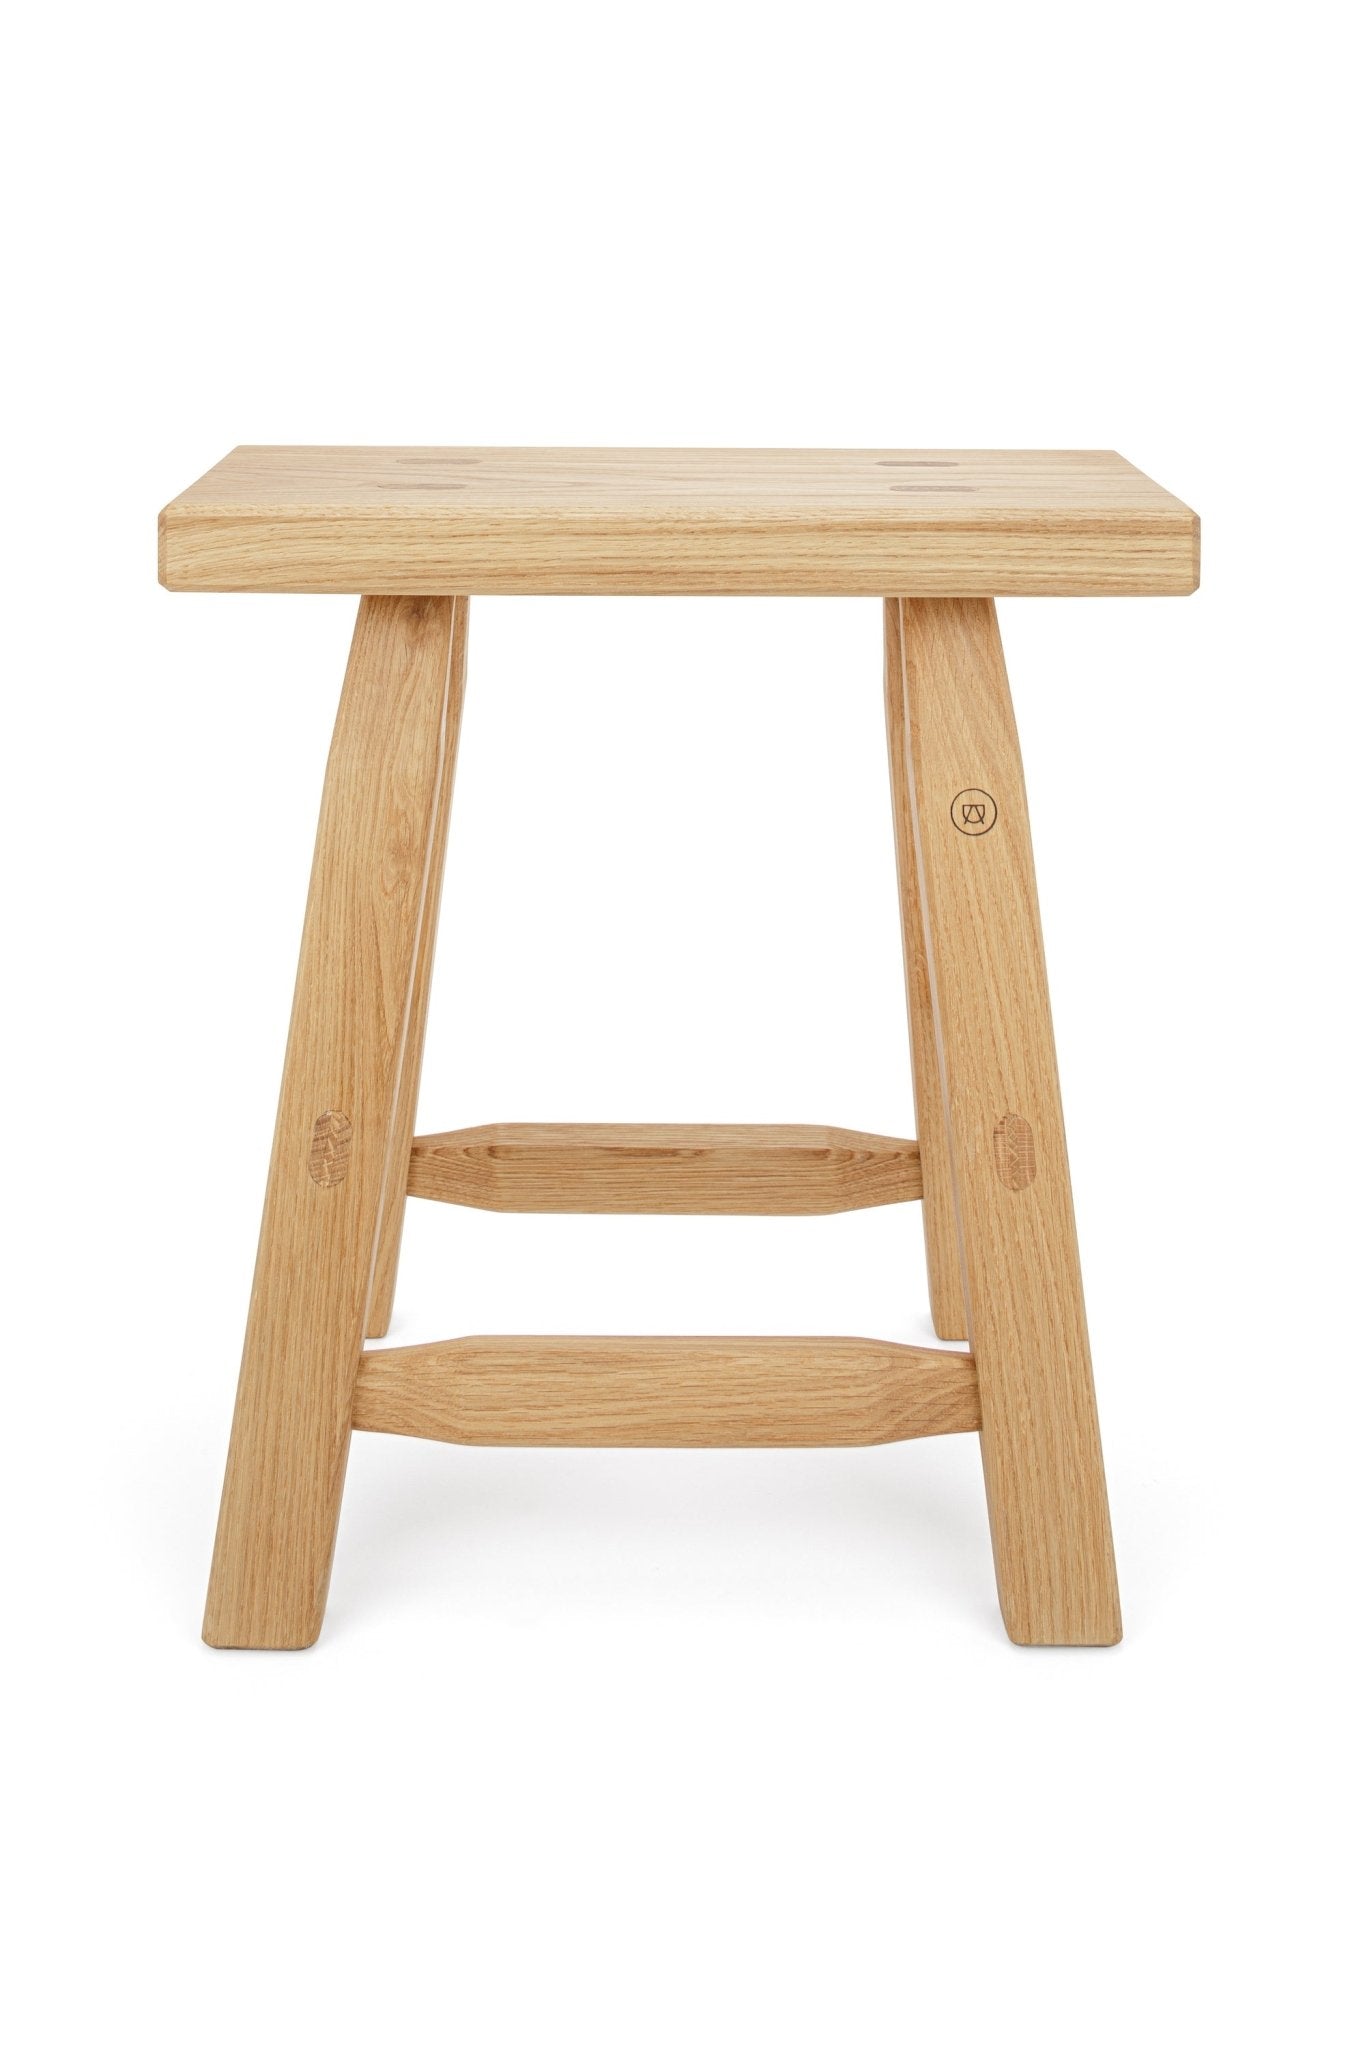 »Hans« stool made of oak with a honey look finish